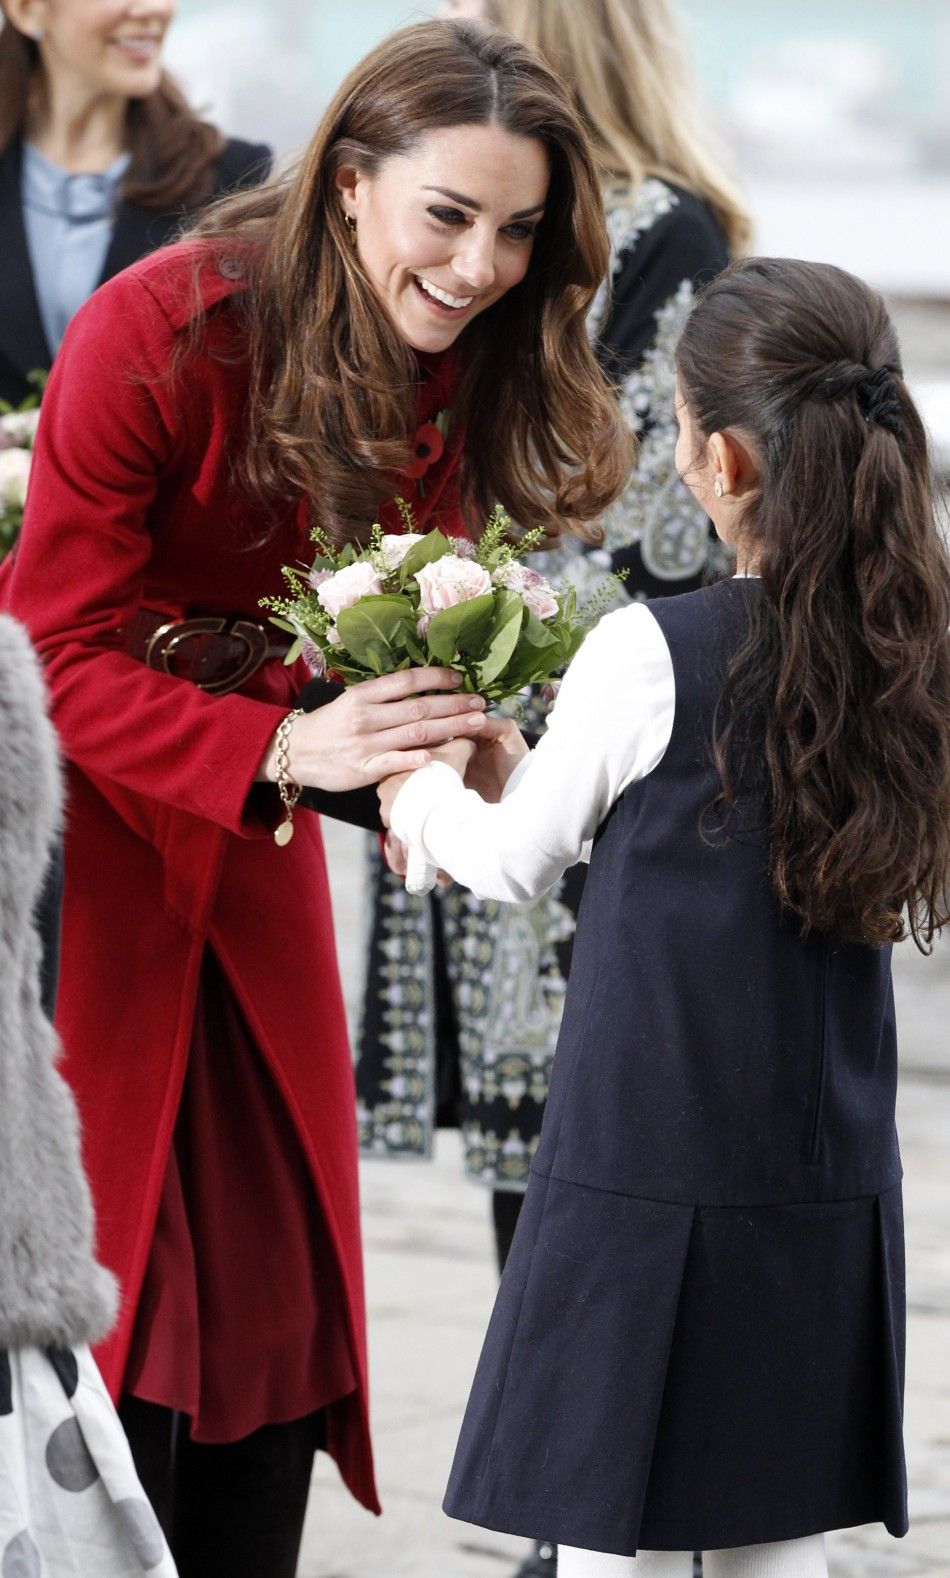  Britains Catherine, Duchess of Cambridge is presented with a bouquet of flowers as she arrives for a visit to the UNICEF emergency supply centre in Copenhagen, Denmark